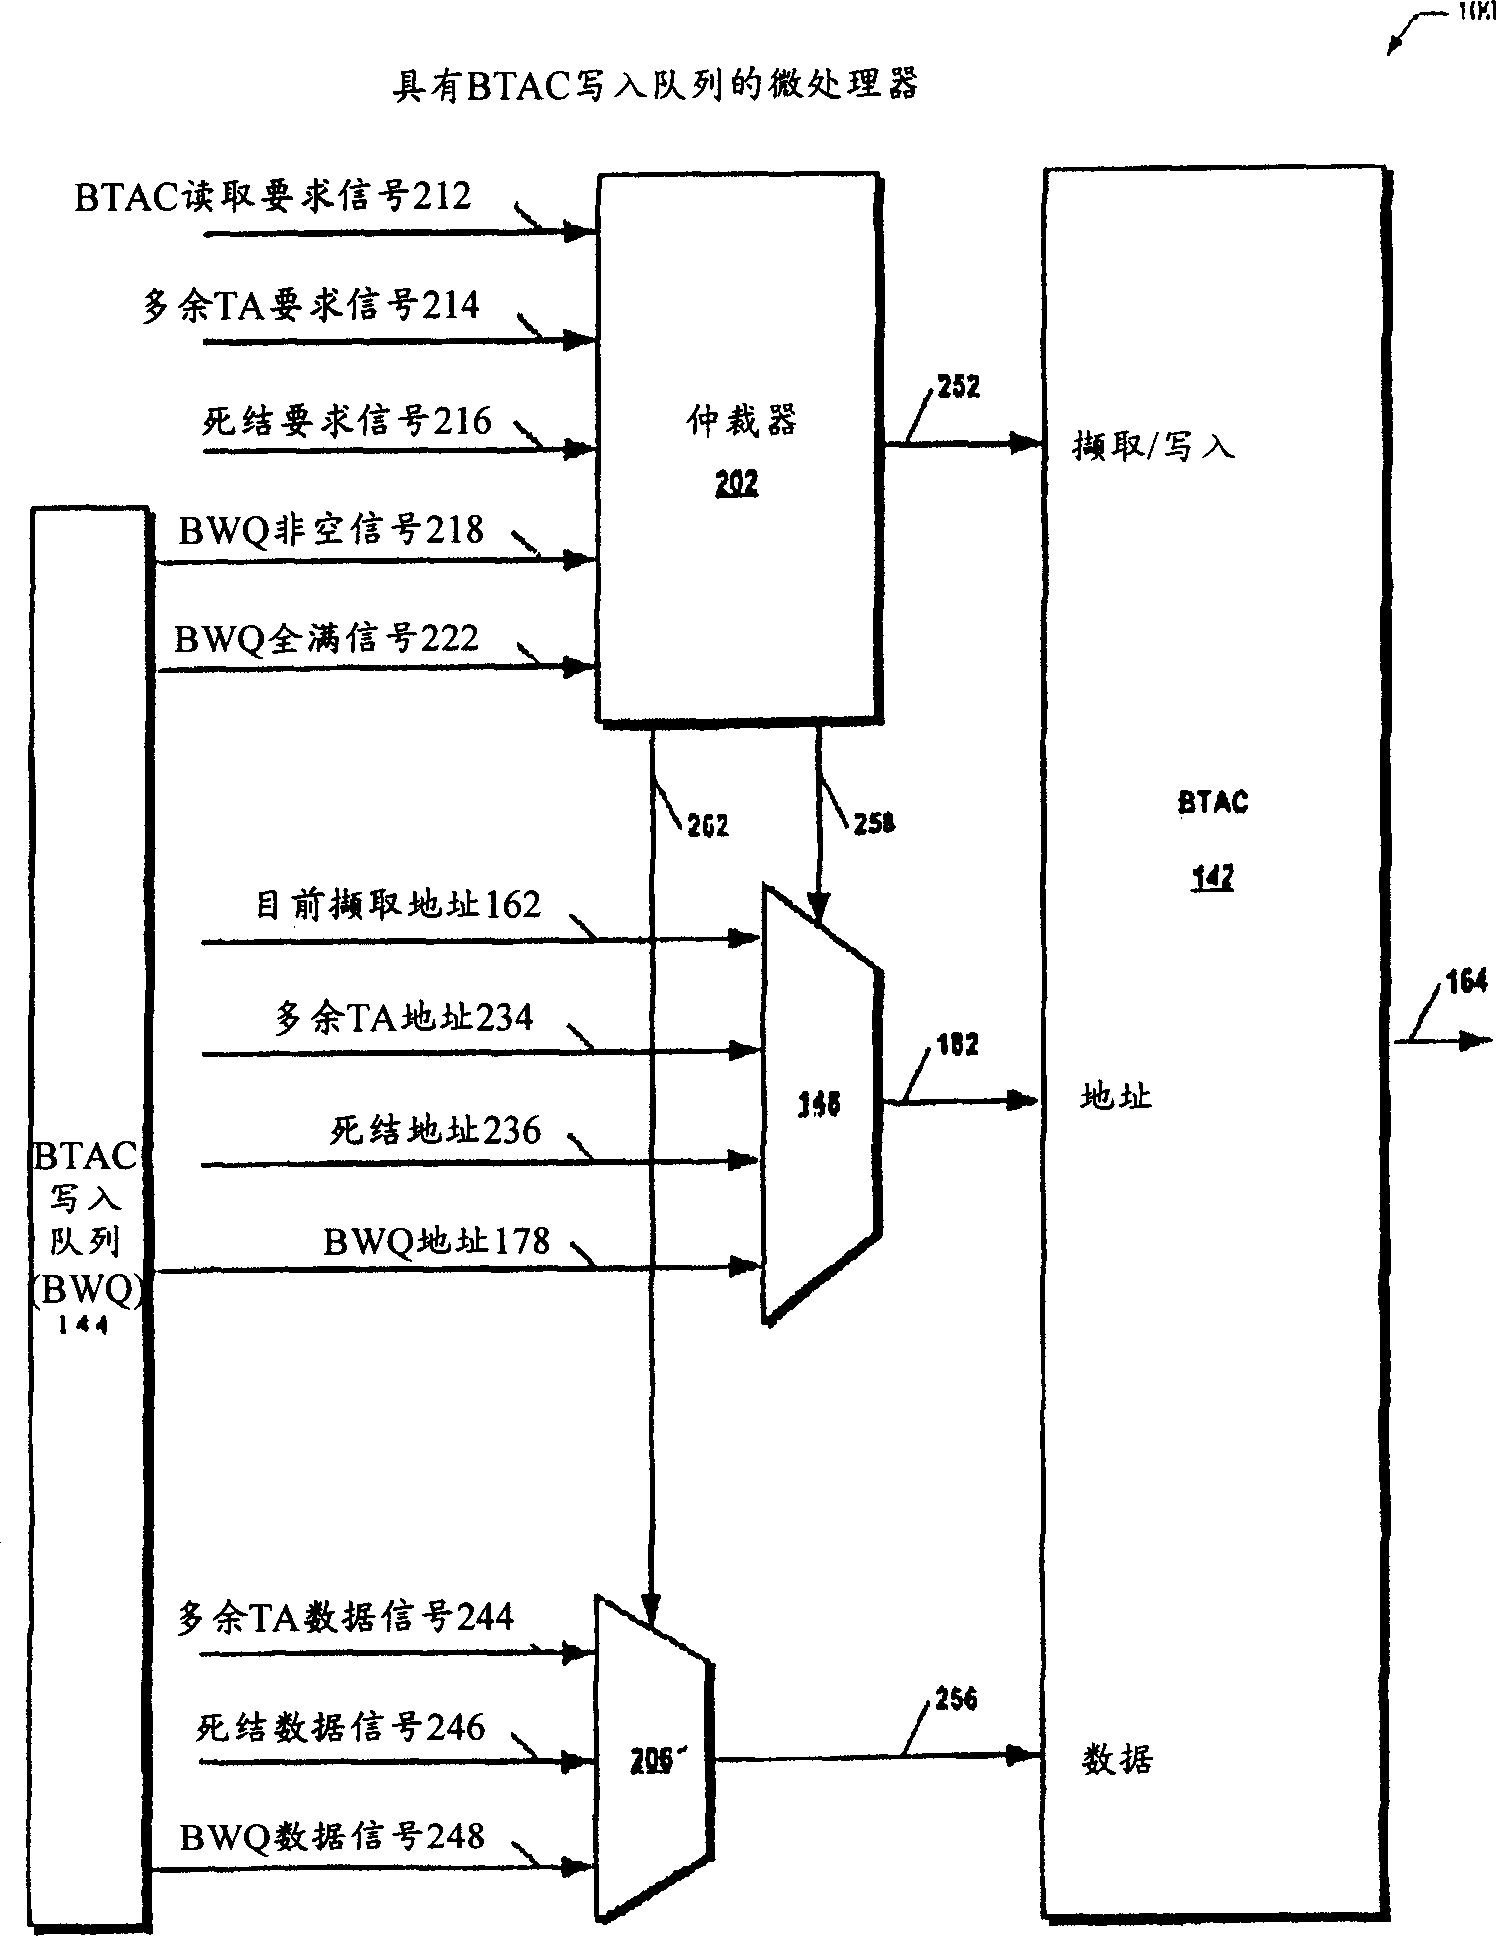 Apparatus and method for efficiently updating branch target address cache